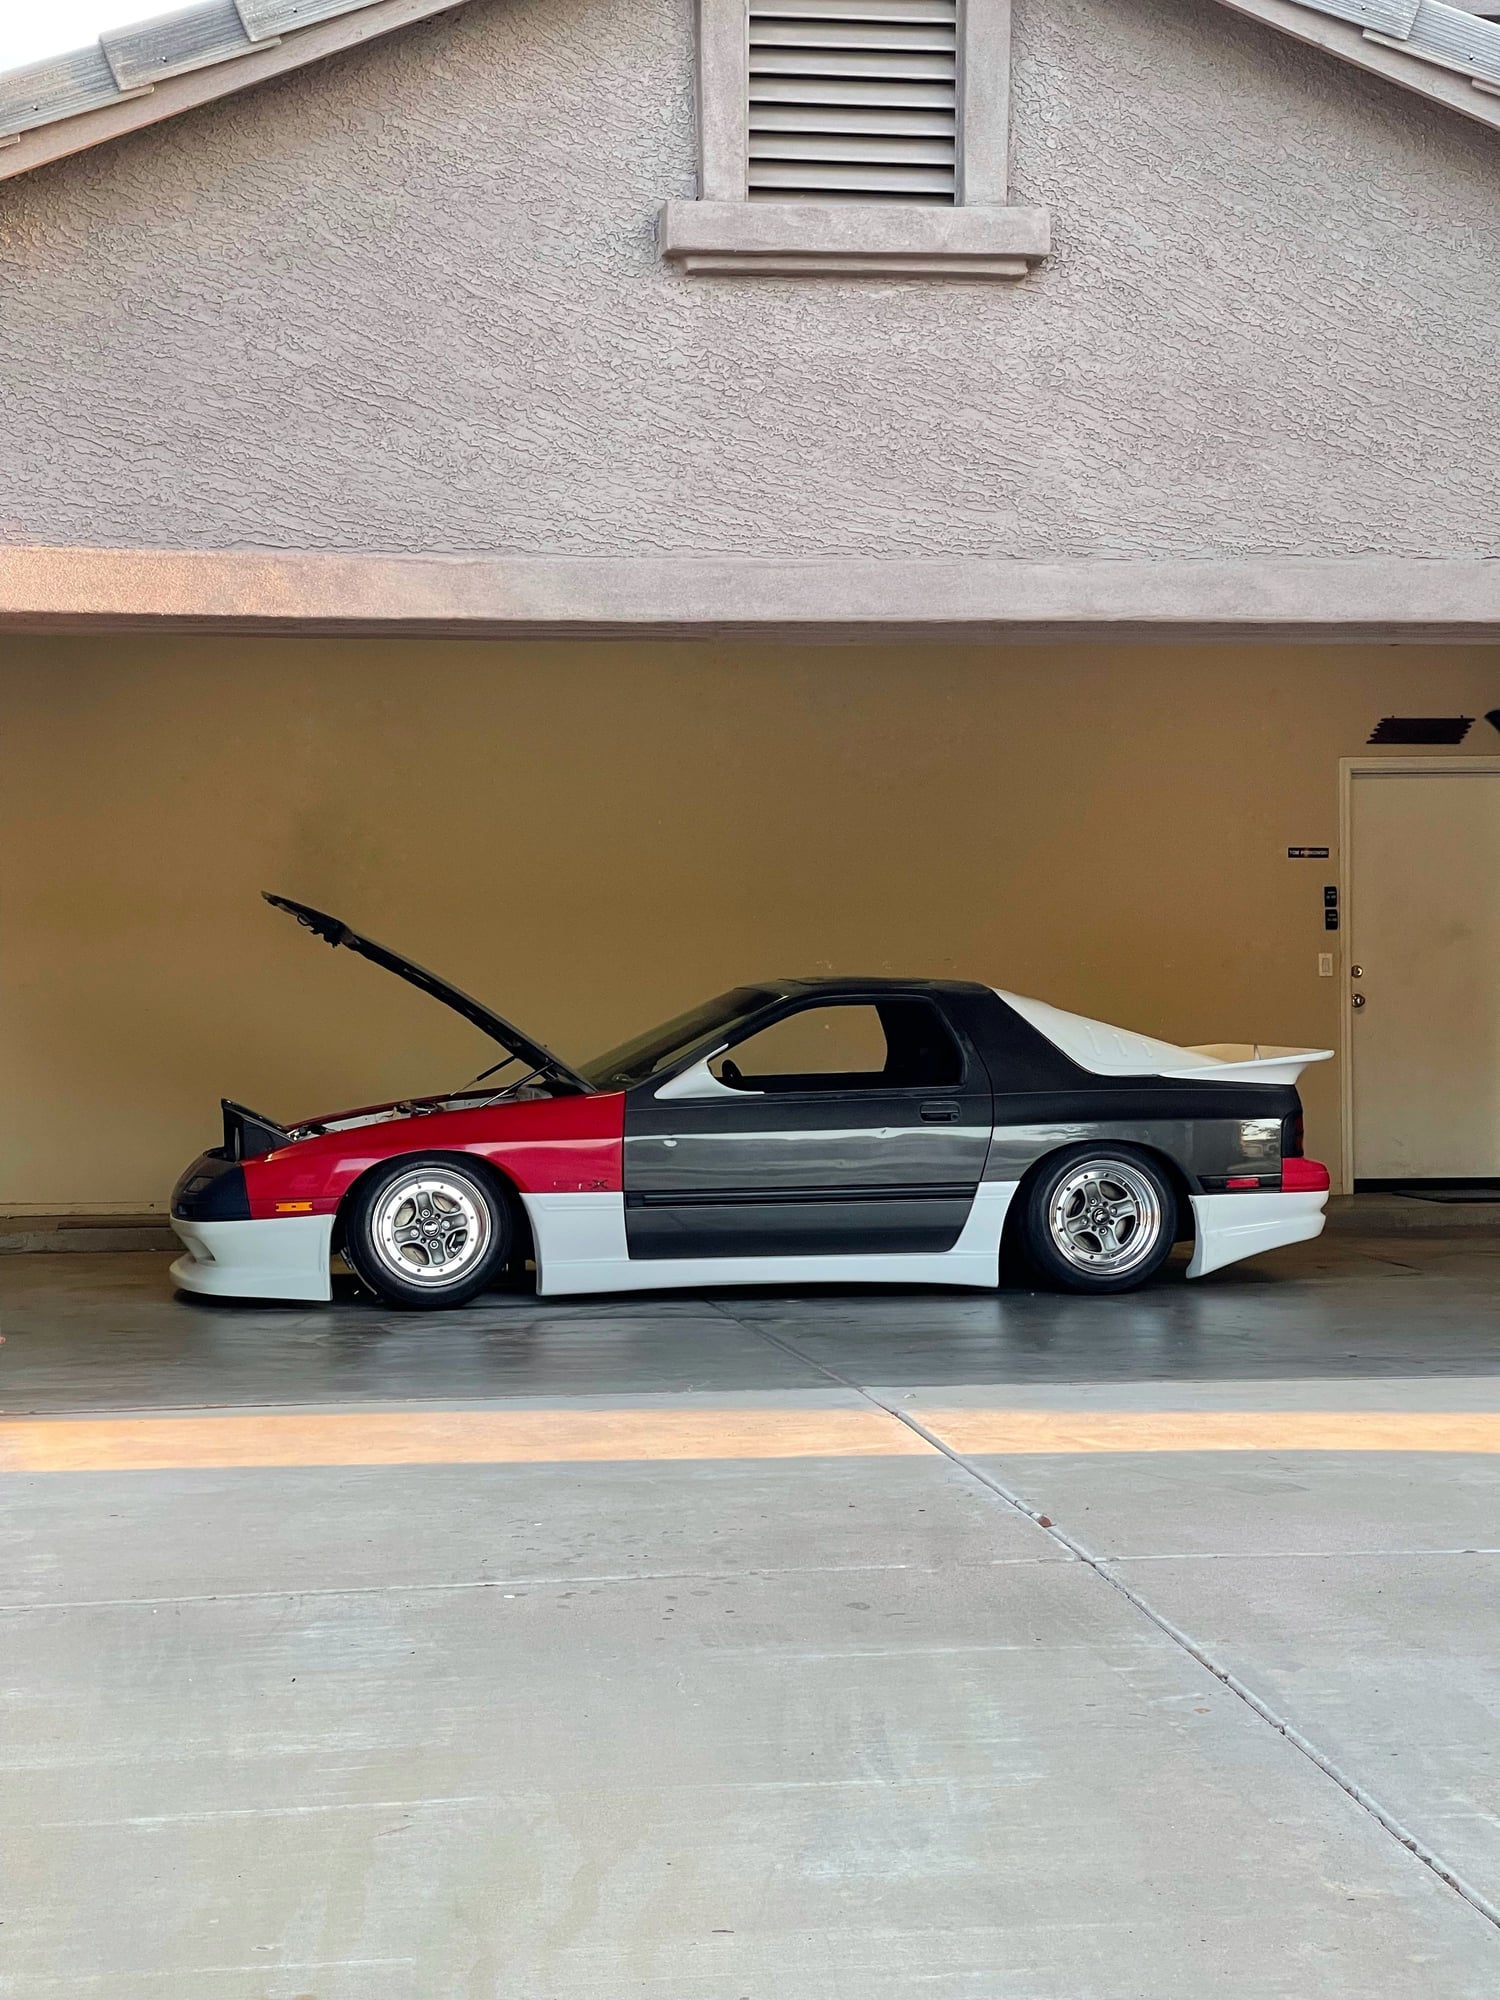 1987 Mazda RX-7 - 1987 Mazda RX7 - Used - VIN JM1FC3318HO510681 - 70,000 Miles - Other - 2WD - Coupe - Gray - Gilbert, AZ 85295, United States